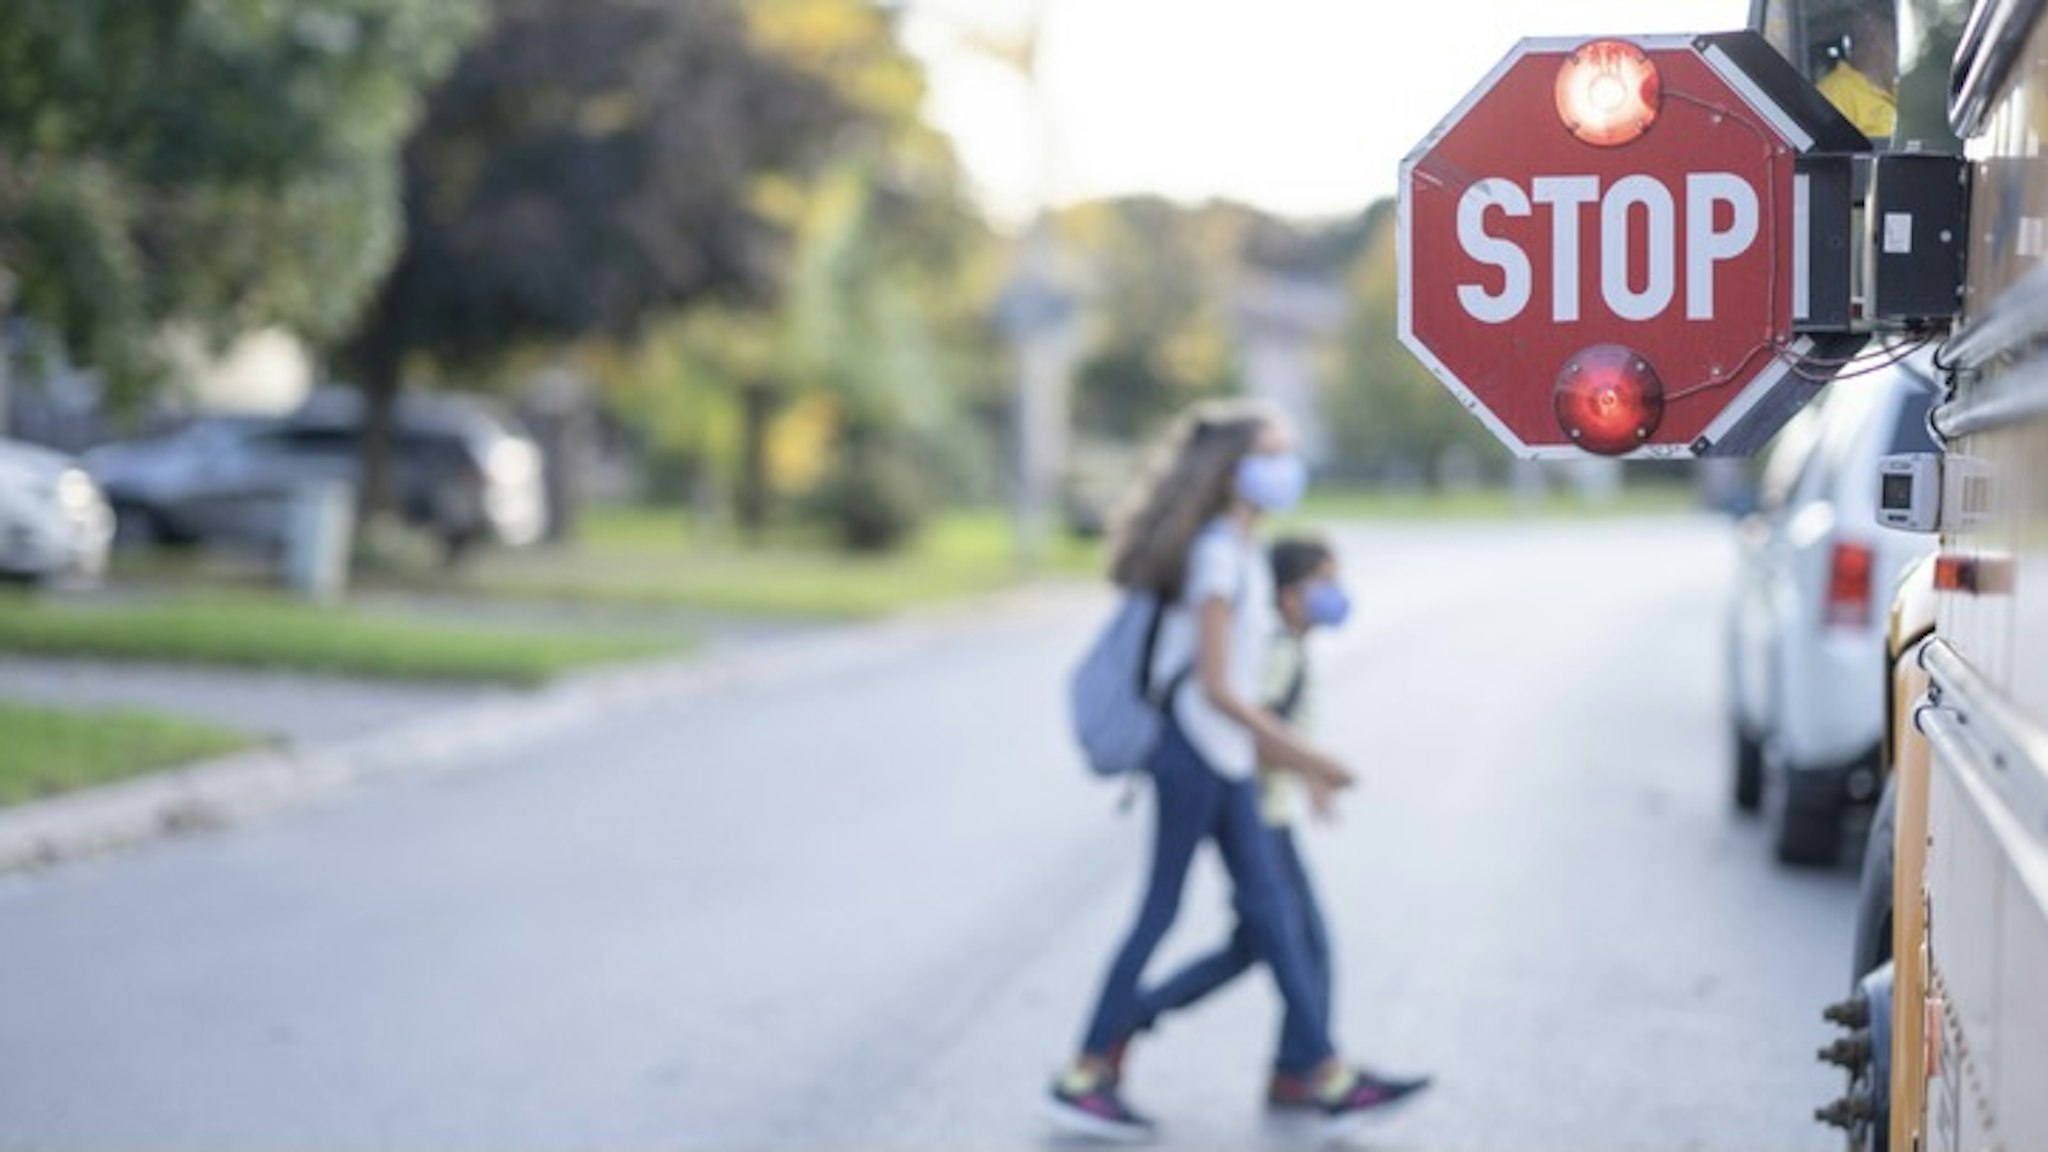 School bus stop sign for children to pass - stock photo A STOP sign is out by the school bus and children can be seeing crossing the road in front of the school bus. FatCamera via Getty Images